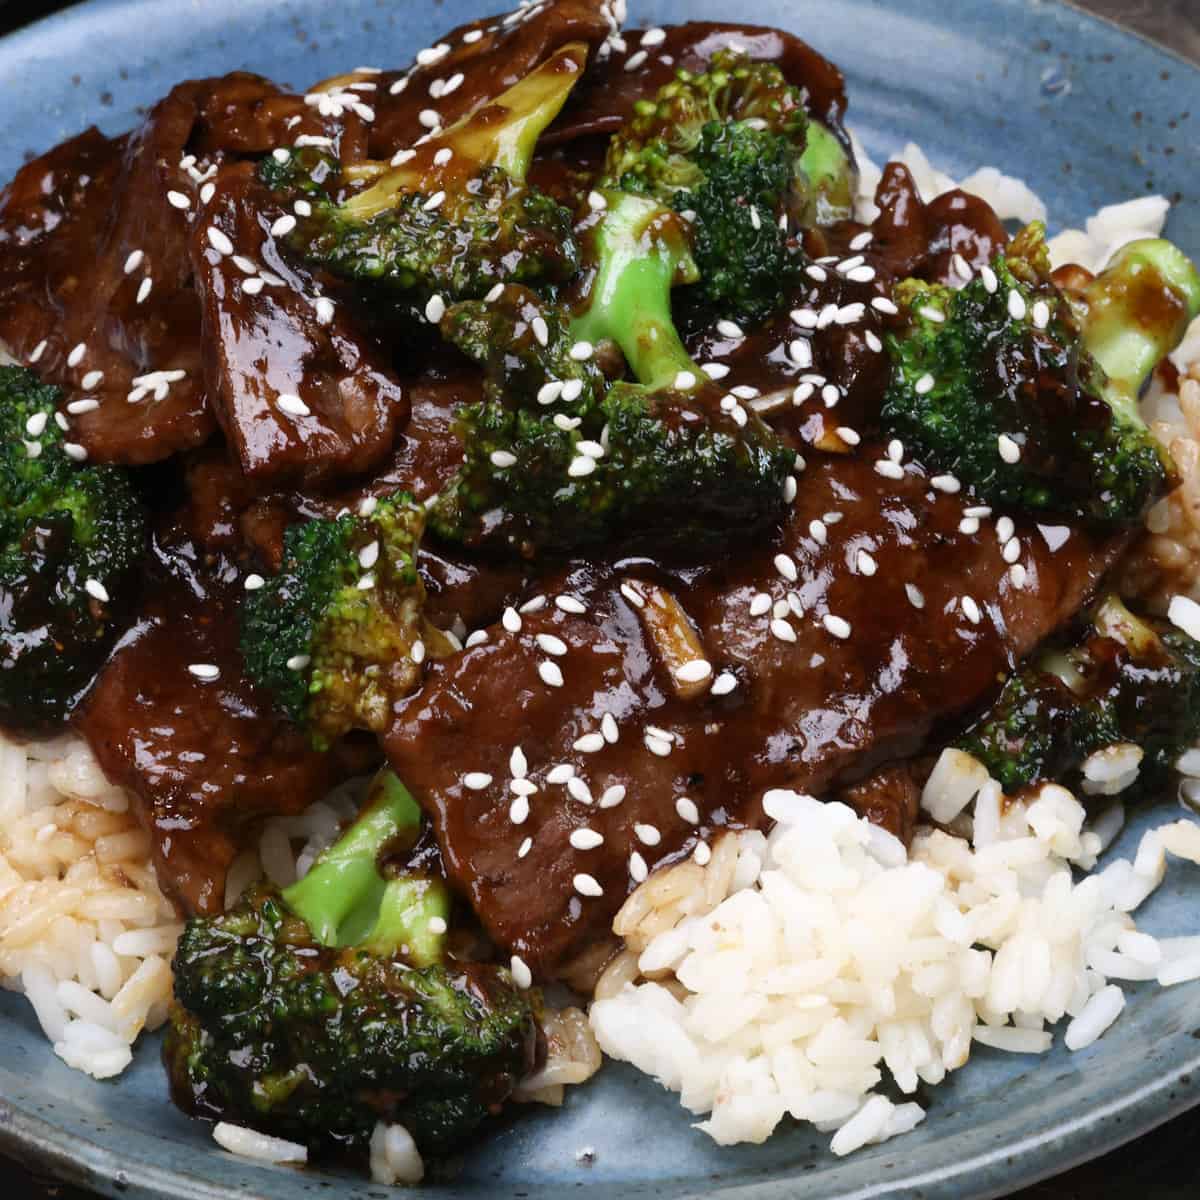 beef and broccoli topped with sesame seeds over white rice.